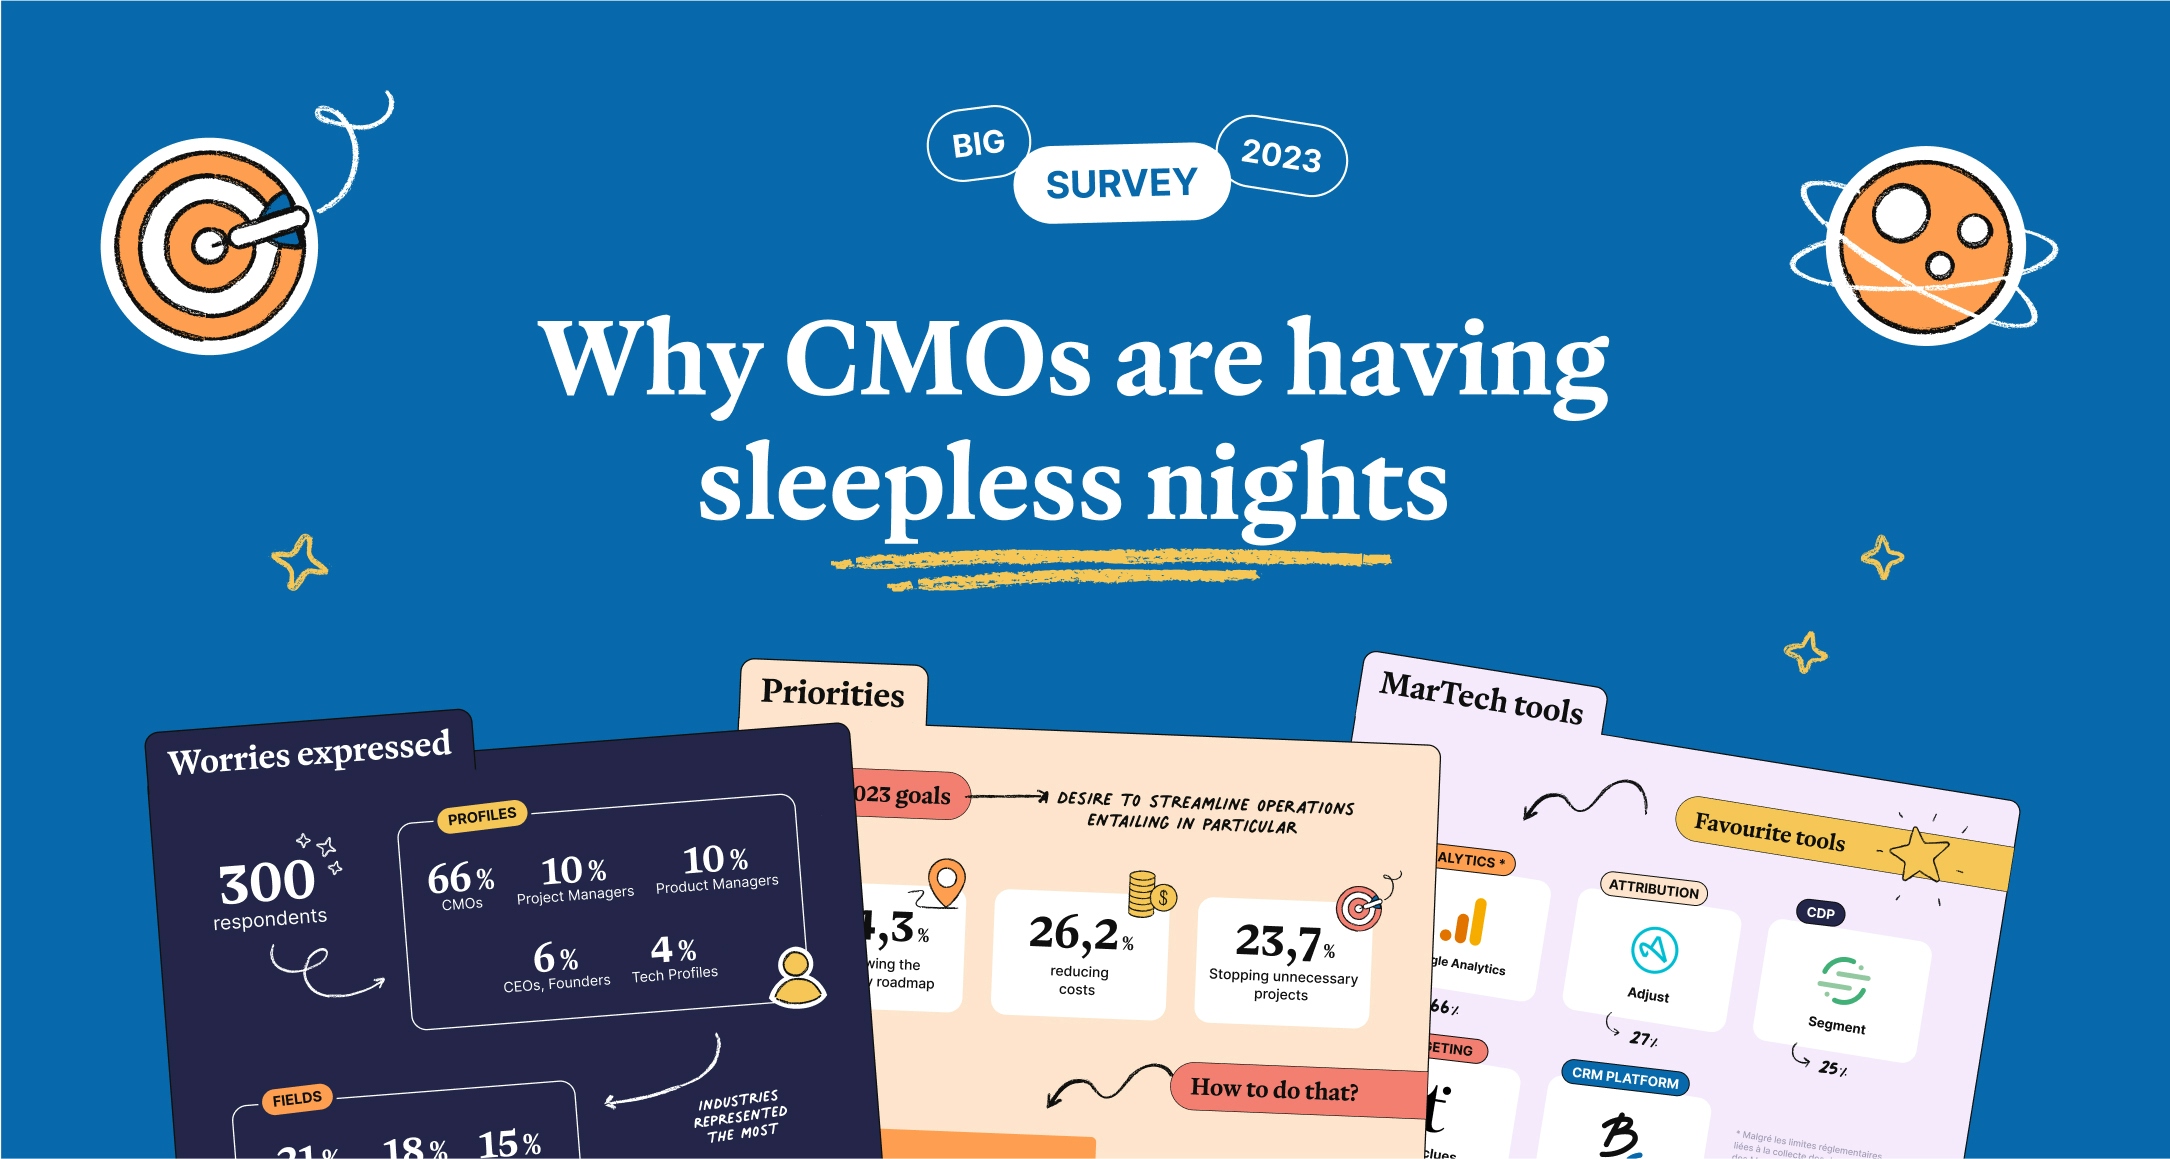 Why CMOs are having sleepless nights in 2023